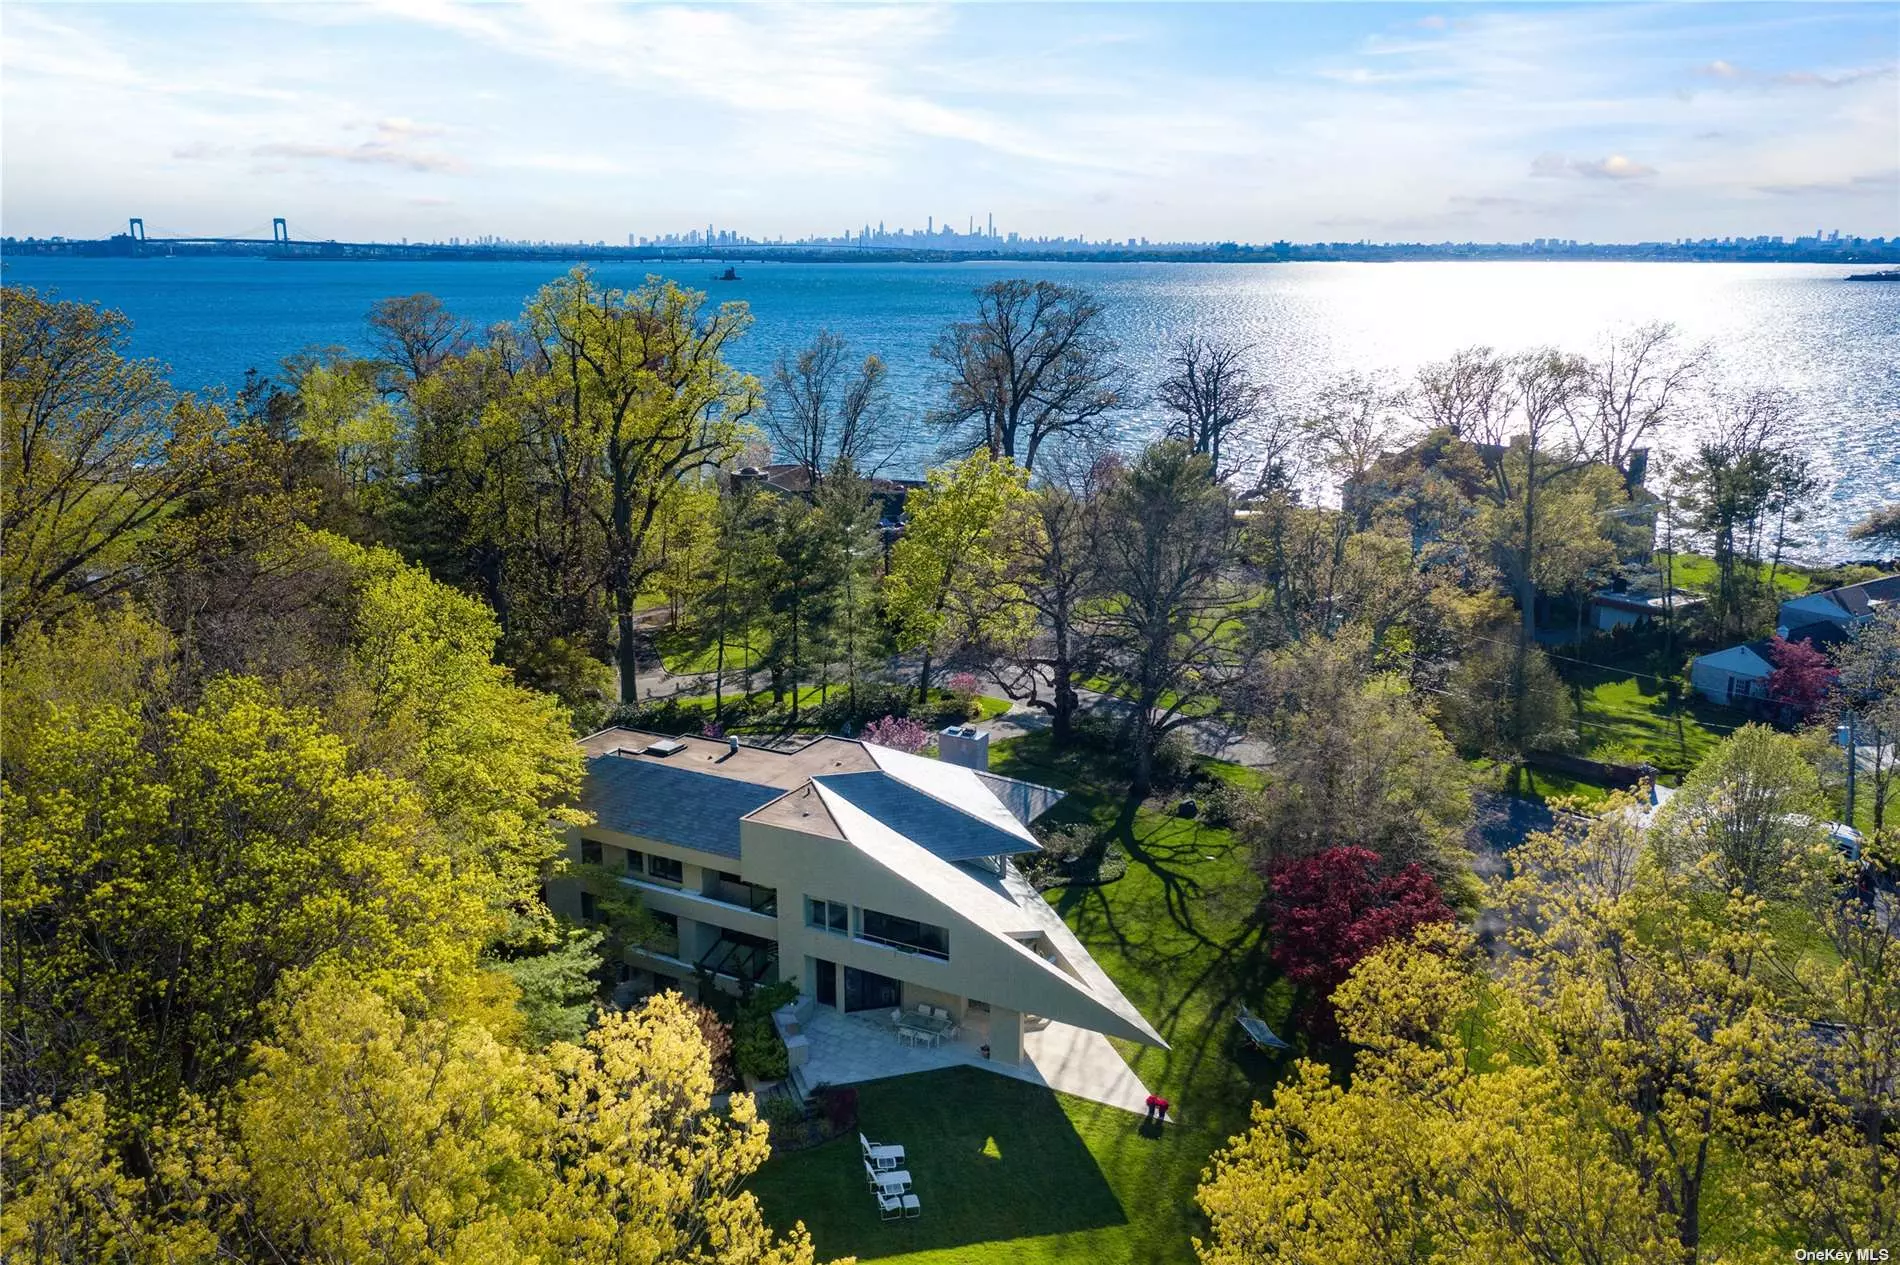 Nestled at the end of a quiet cul-de-sac in Kings Point, 49 Pond Road is a stunning modern, contemporary residence custom built to emphasize exquisite views of the Long Island Sound and Manhattan Skyline. The exterior was designed using timeless materials featuring a cascading blue-slate roof while effortlessly integrating limestone and wood elements. The property boasts 1.3+ acres; the majestic grounds have matured, colorful privacy plantings and sprawling flat lawn space. The yard includes a large stone entertaining patio, half-covered, with a built-in outdoor kitchen and a roomy storage shed. The residence comes with access to a private, sandy beach.